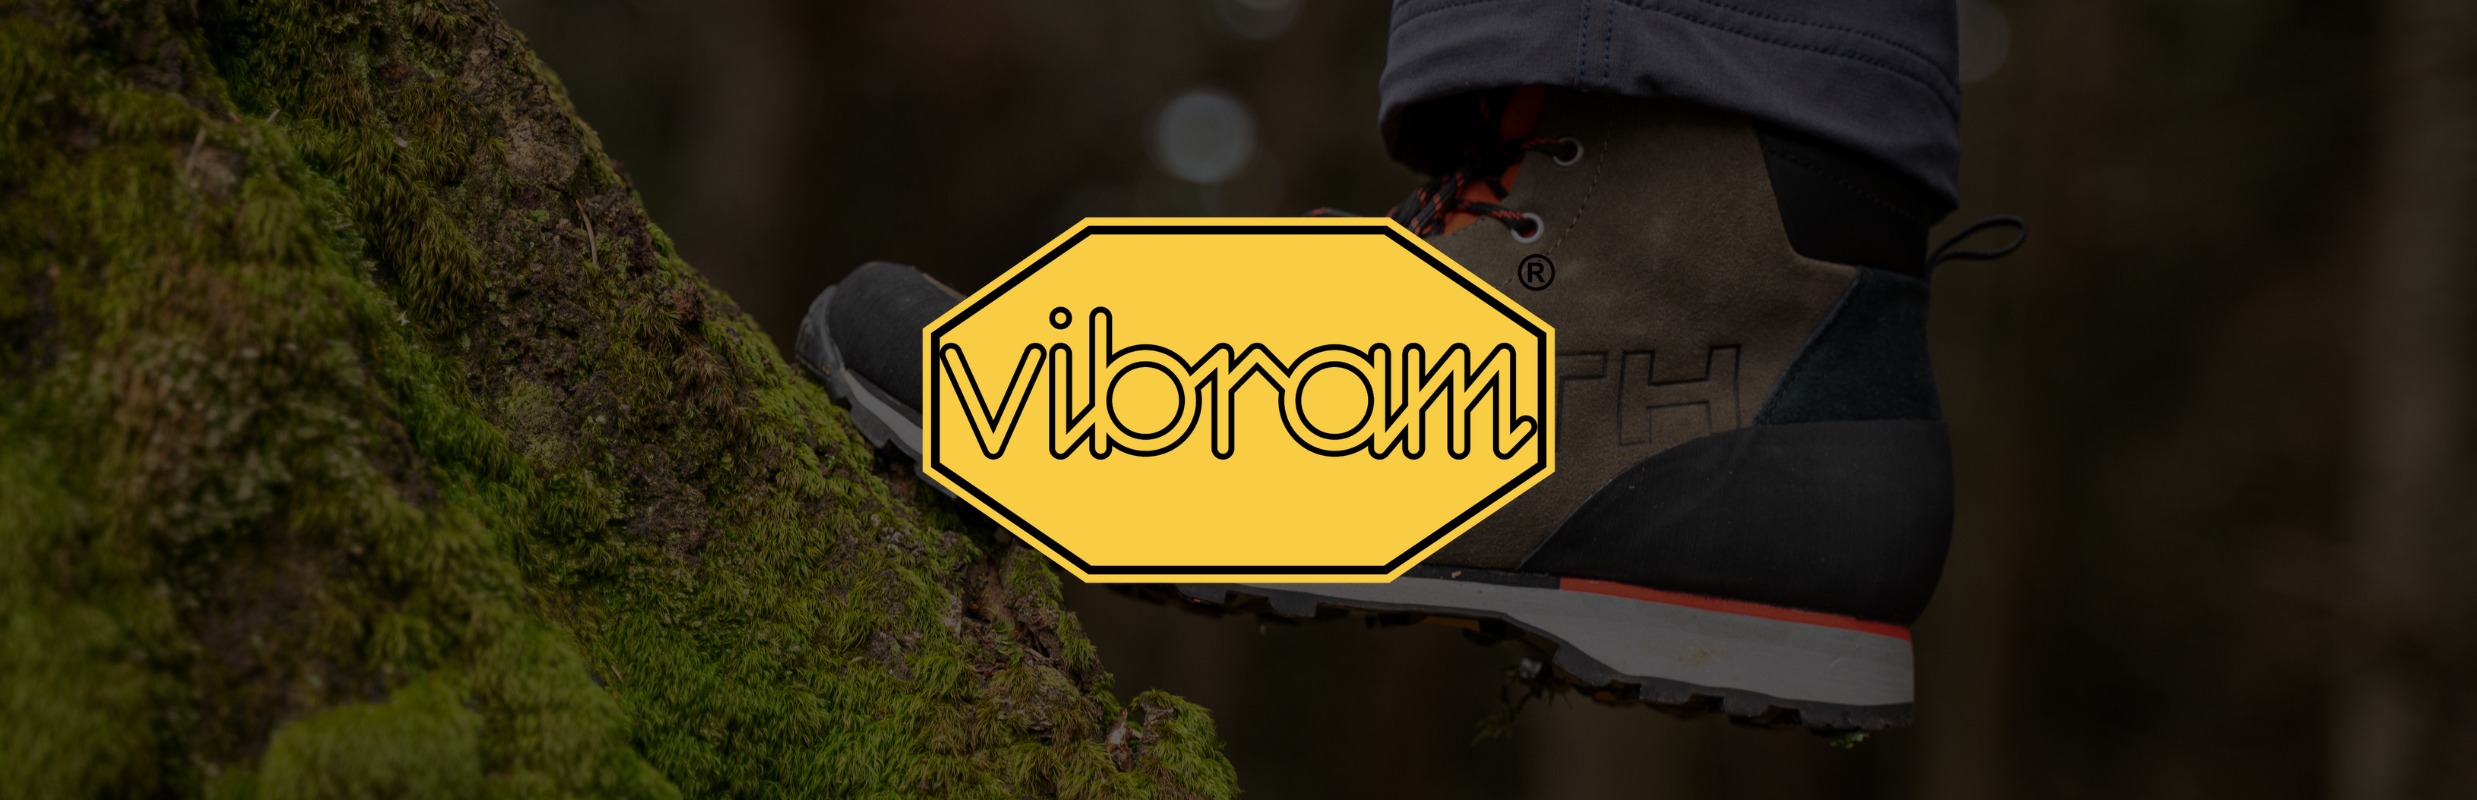 VIBRAM®: This popular brand is a guarantee of firm footing in pleasant and challenging conditions